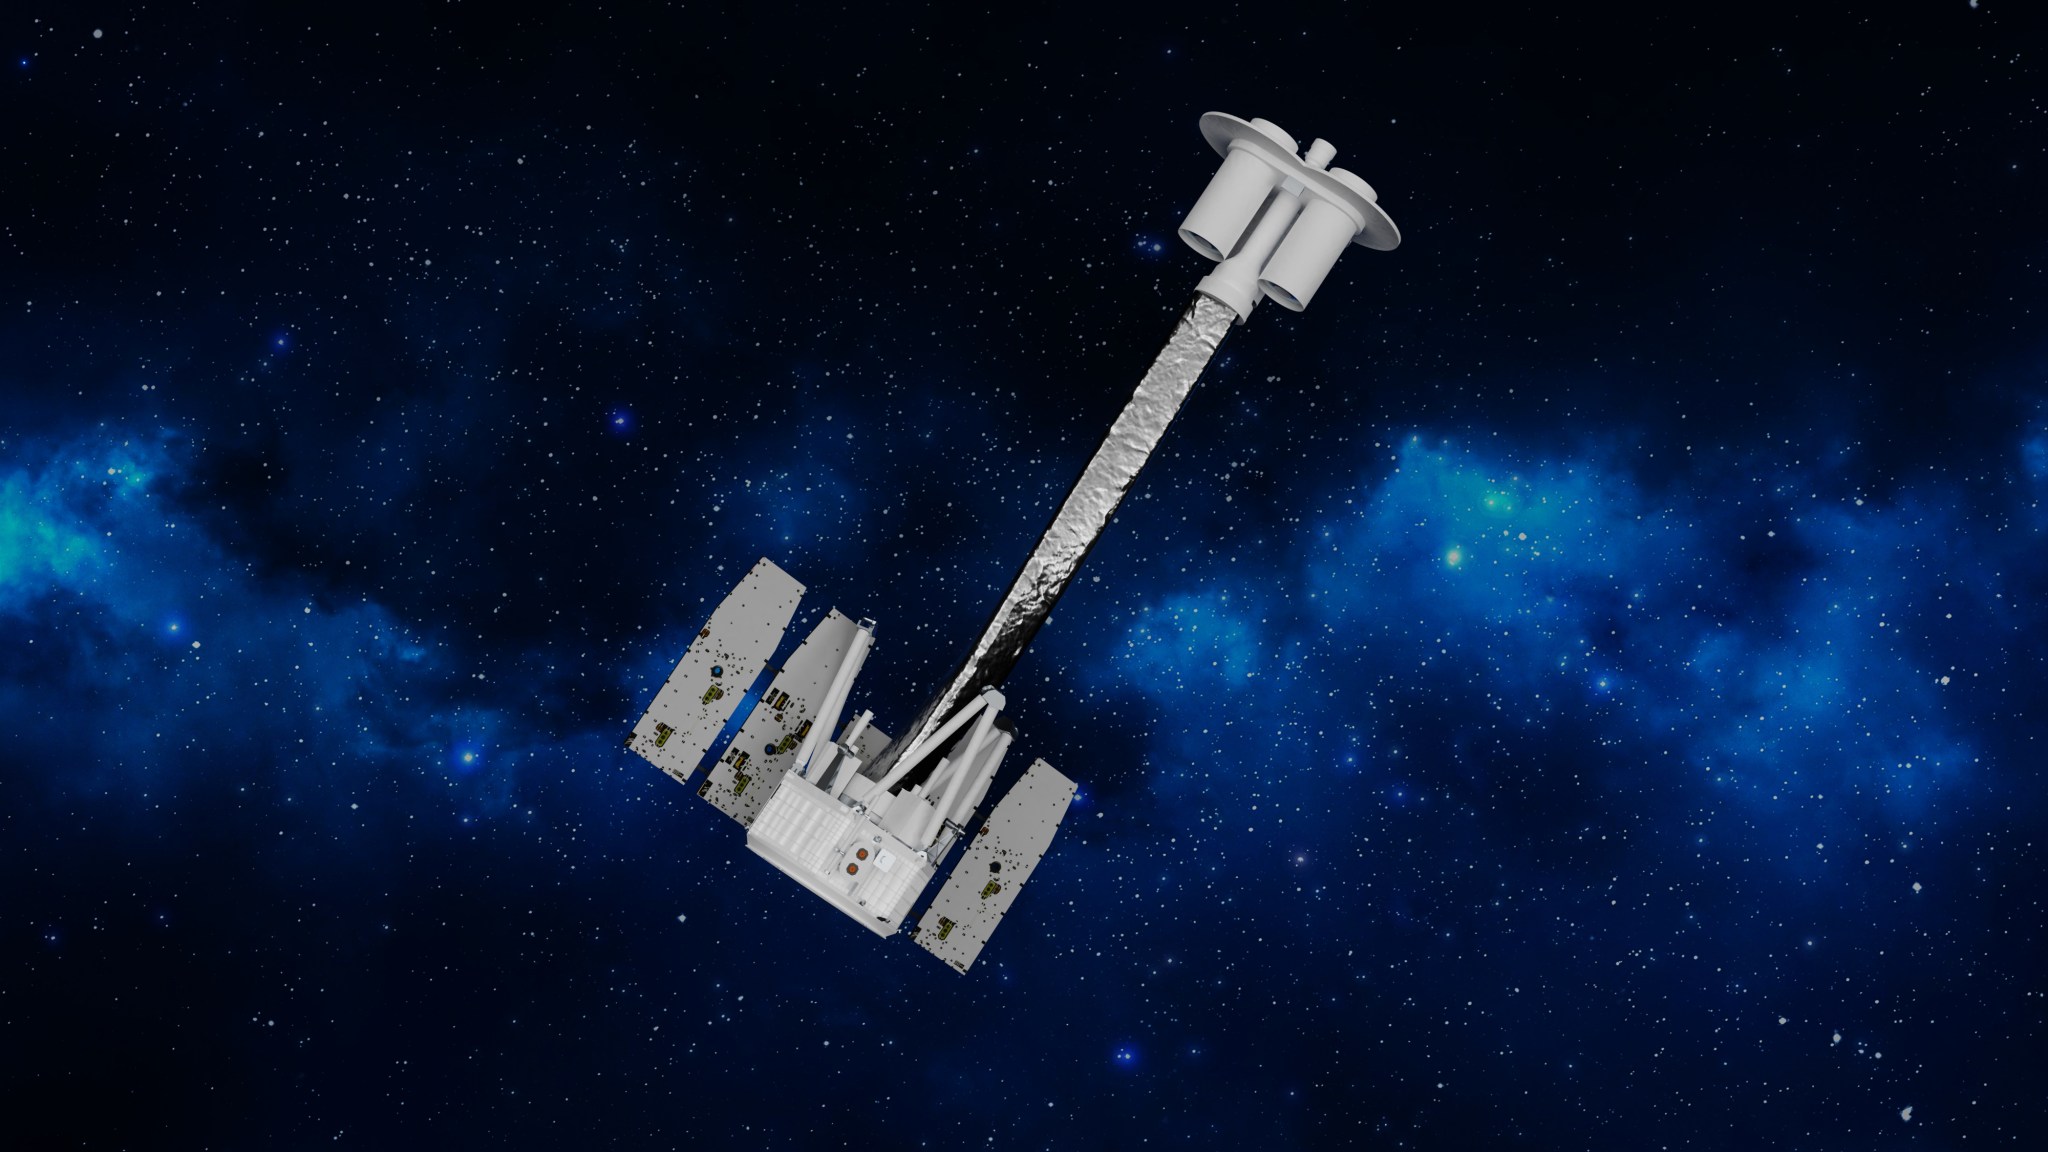 NASA’s Imaging X-ray Polarimetry Explorer (IXPE) mission is the first satellite dedicated to measuring the polarization of X-rays from a variety of cosmic sources, such as black holes and neutron stars.